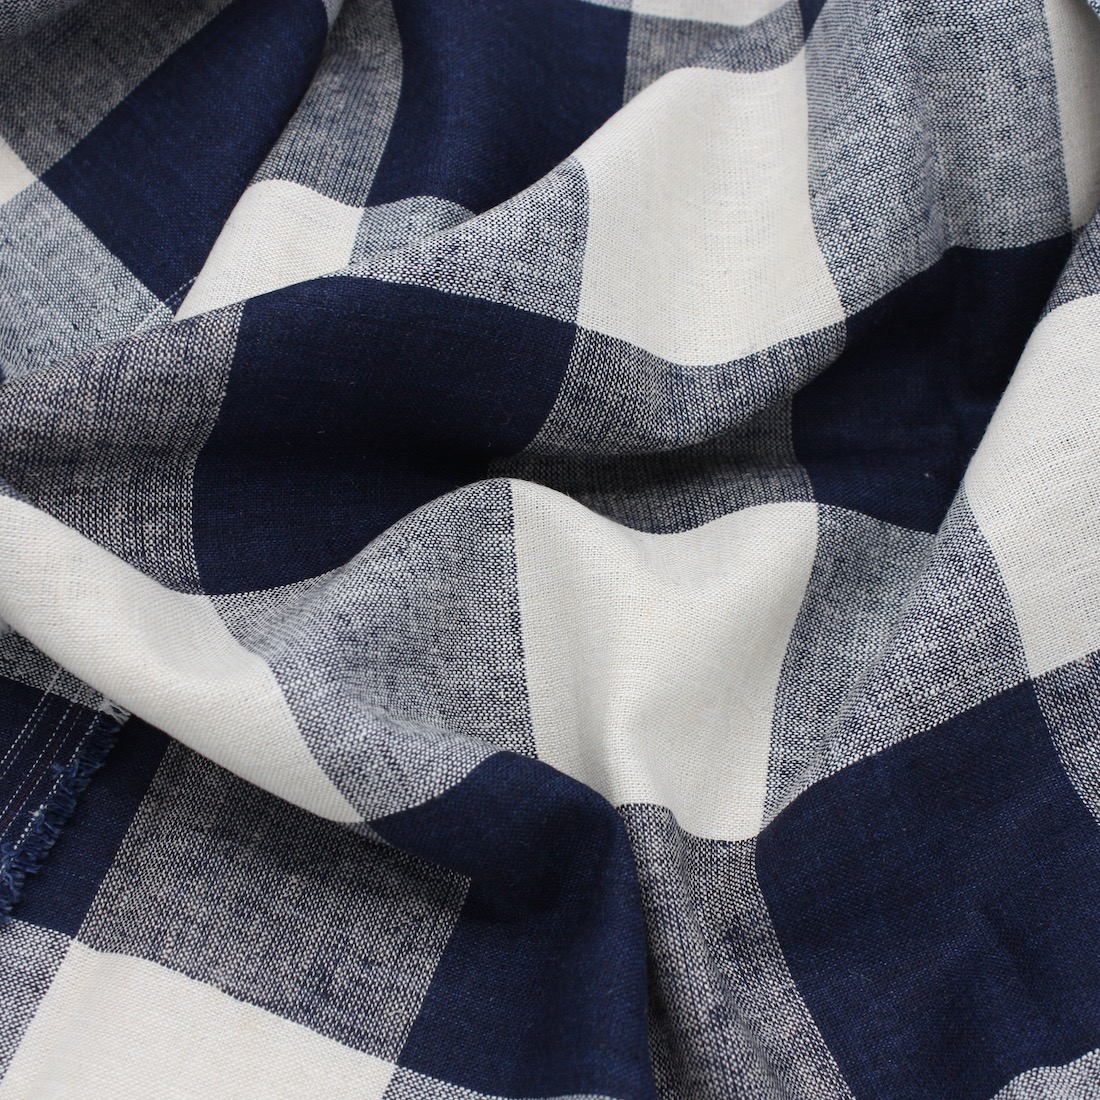 Linen and Viscose Rayon Large Gingham Check Fabric in Navy